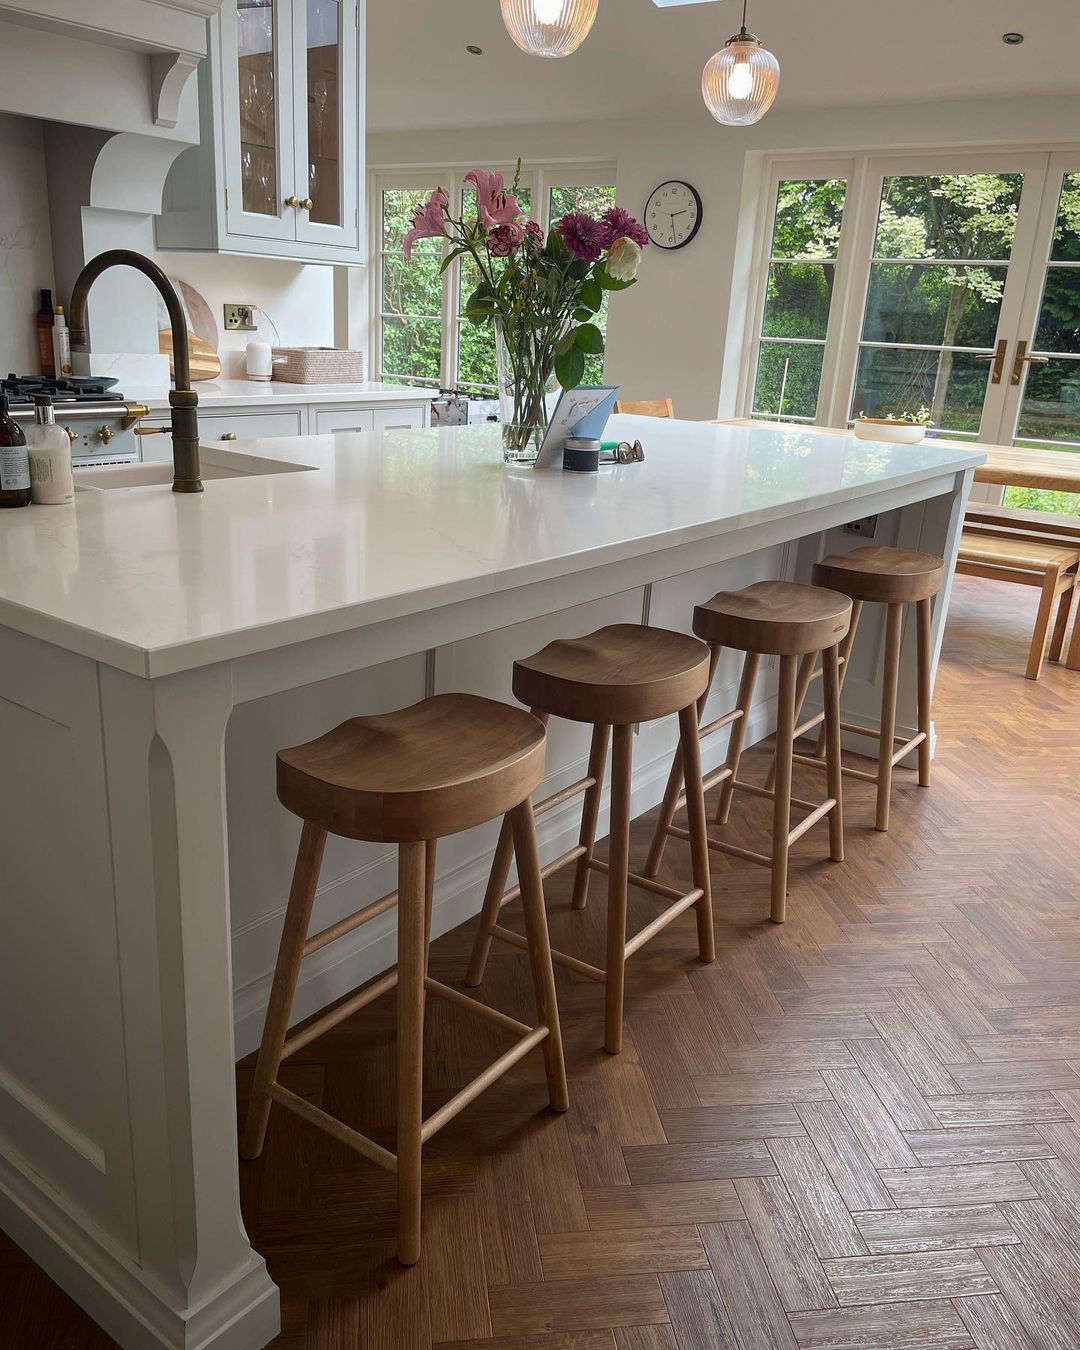 Finding the Perfect Seating: A Guide to Kitchen Stools